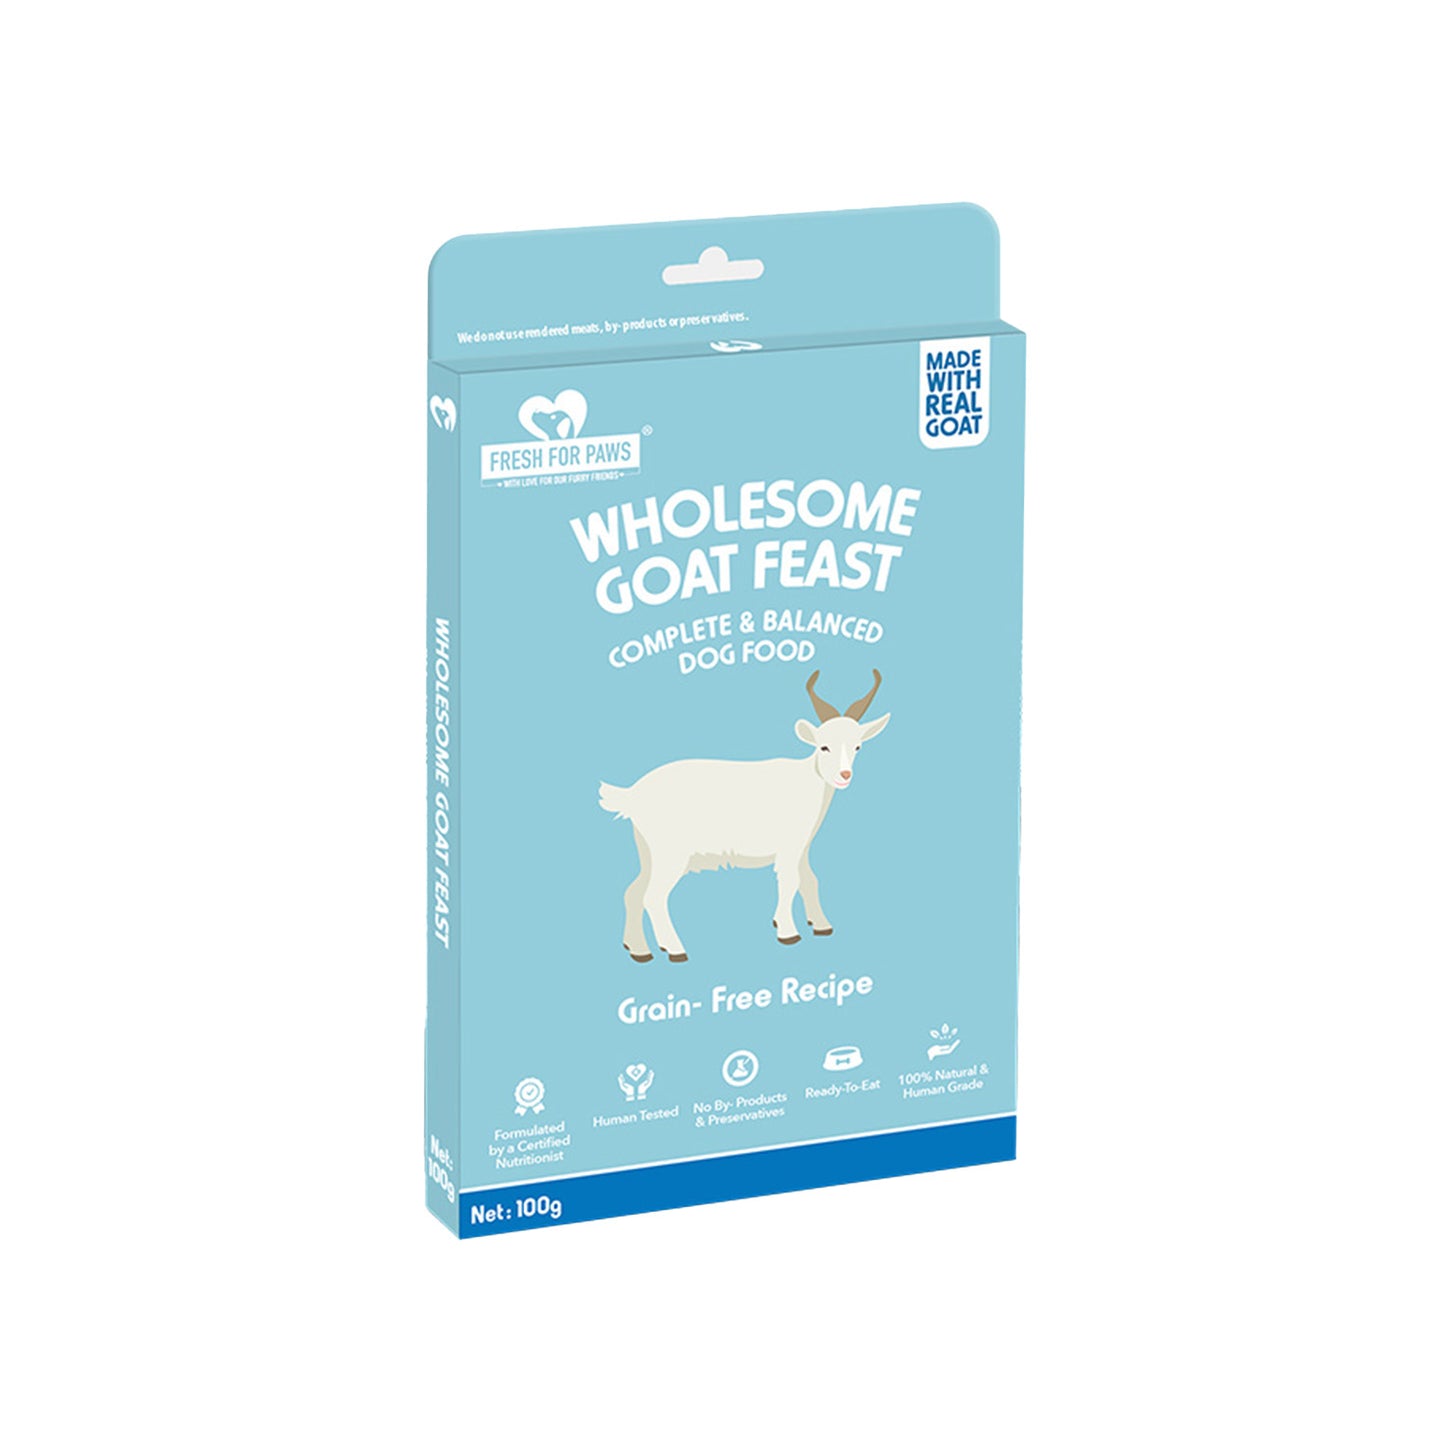 Fresh For Paws - Wholesome Goat Feast For Dogs & Cats